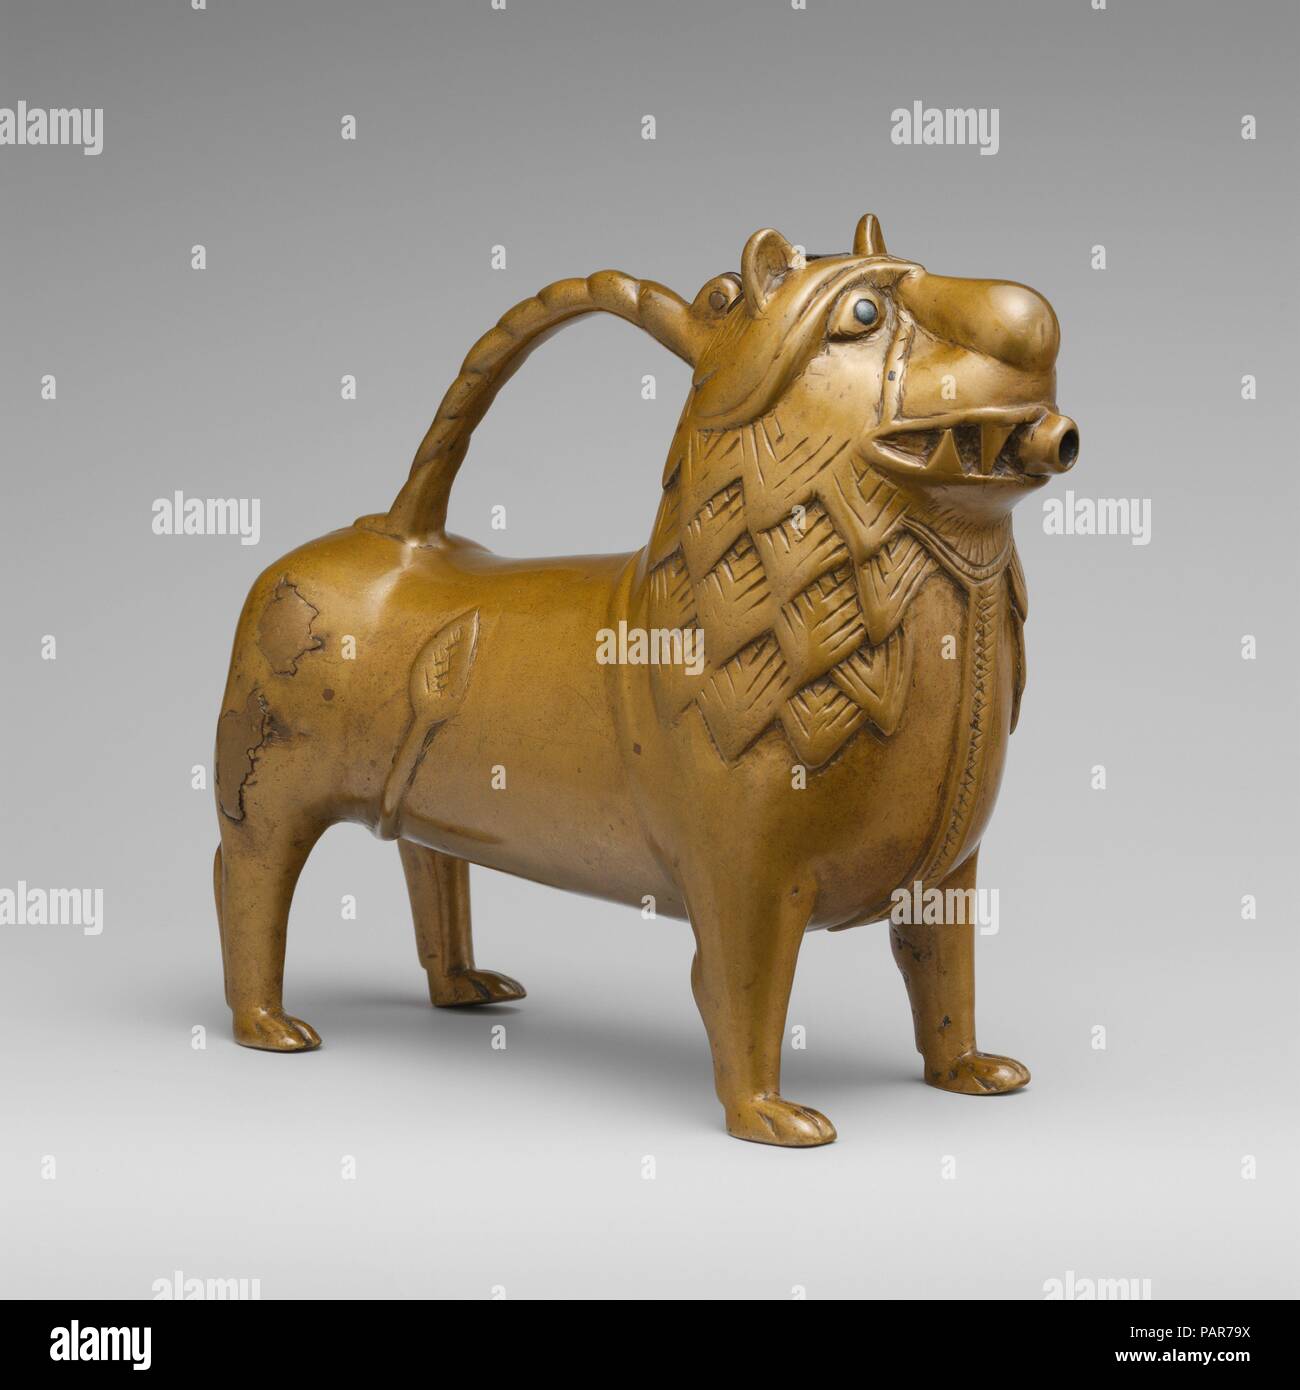 Aquamanile in the Form of a Lion. Culture: North German. Dimensions: Overall: 7 11/16 x 8 5/8 x 3 7/16 in. (19.5 x 21.9 x 8.7 cm)  Thickness PD: 9/100-1/10 in. (0.22-0.25 cm)  Weight PD: 72.9oz. (2067g). Date: 12th century.  The lion, because of its exceptional strength, was associated in the Middle Ages with Christ and was the animal most frequently employed for aquamanilia. The vessel was filled through the opening at the top of the head, and water was poured from the spout in the mouth. Museum: Metropolitan Museum of Art, New York, USA. Stock Photo